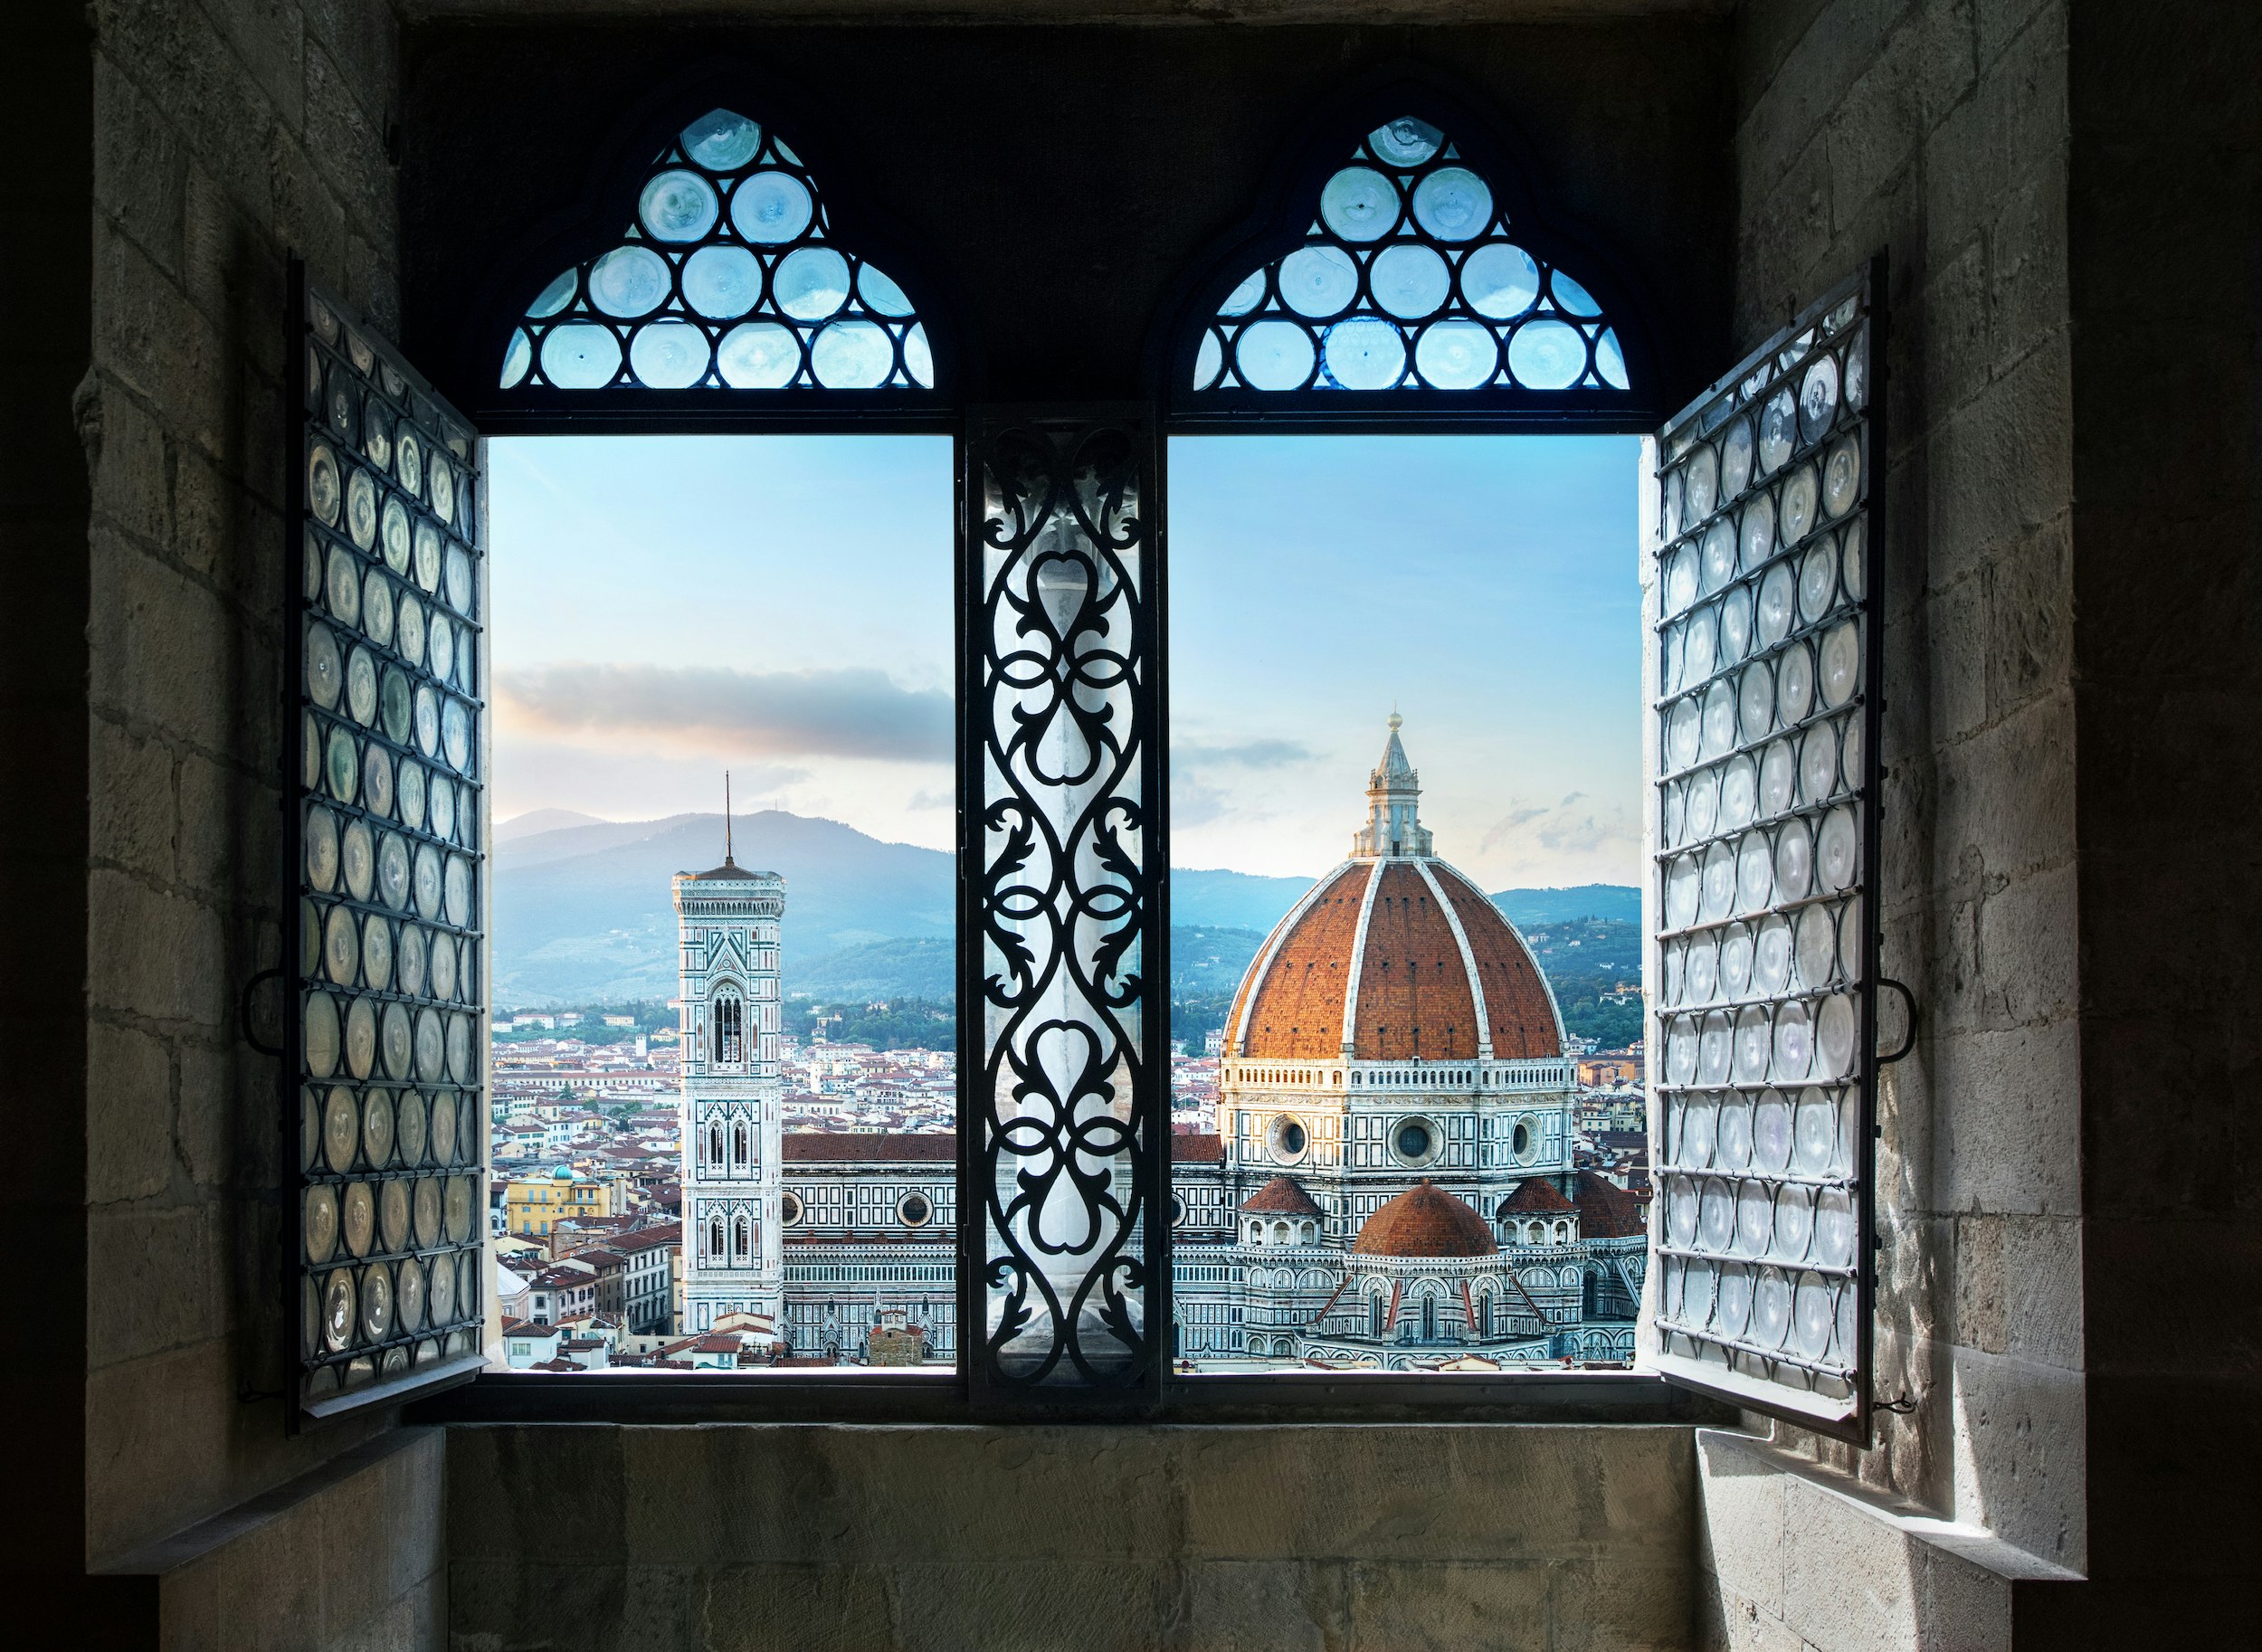 A view of the iconic red Duomo through the window of a Florentine home